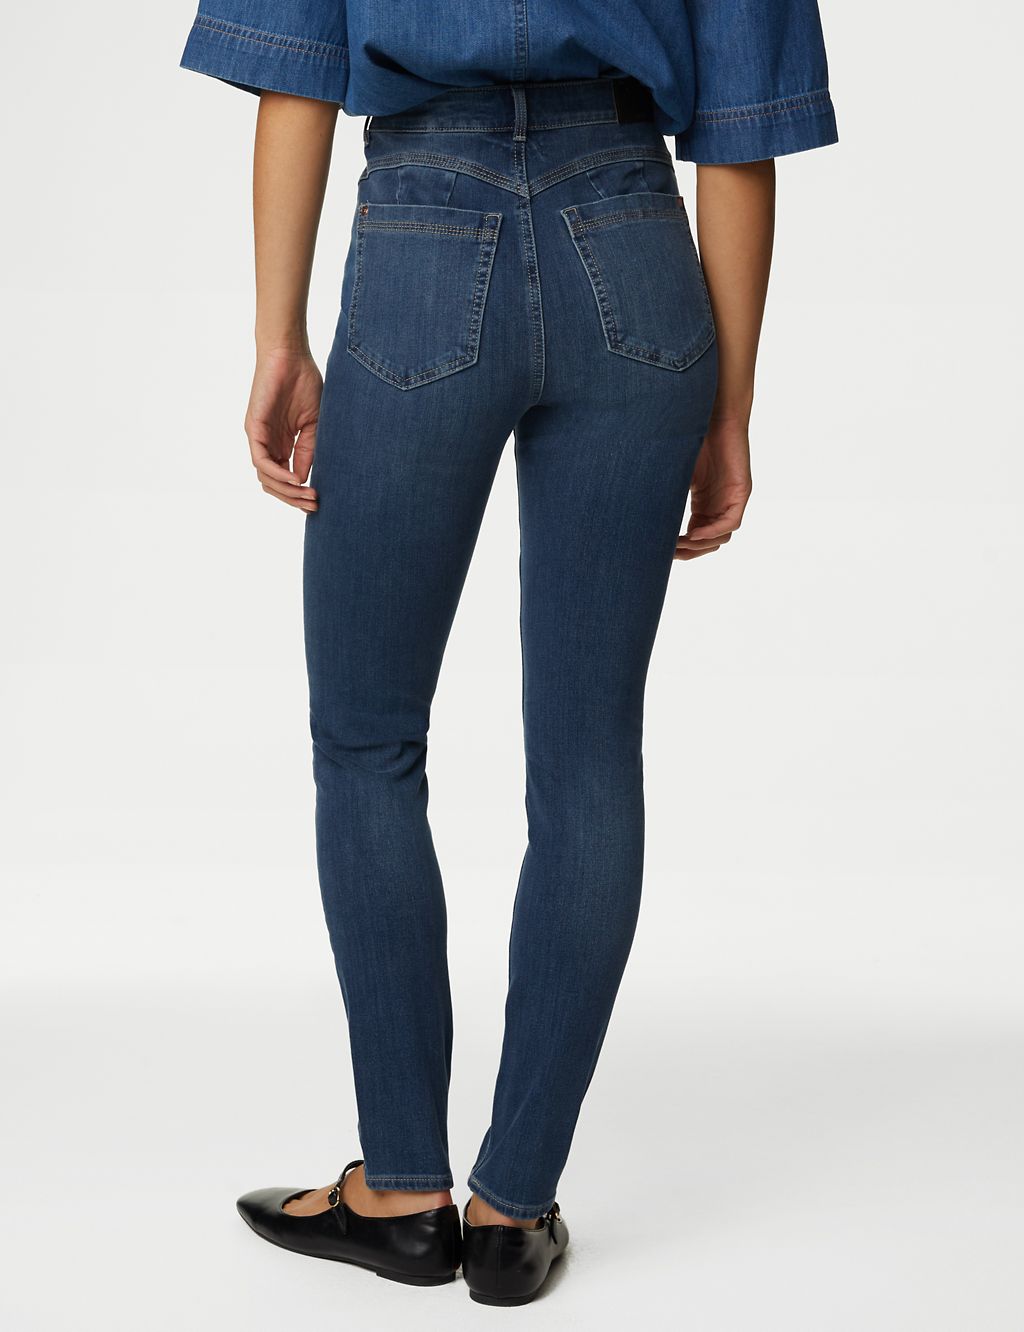 Magic Shaping High Waisted Skinny Jeans 4 of 7